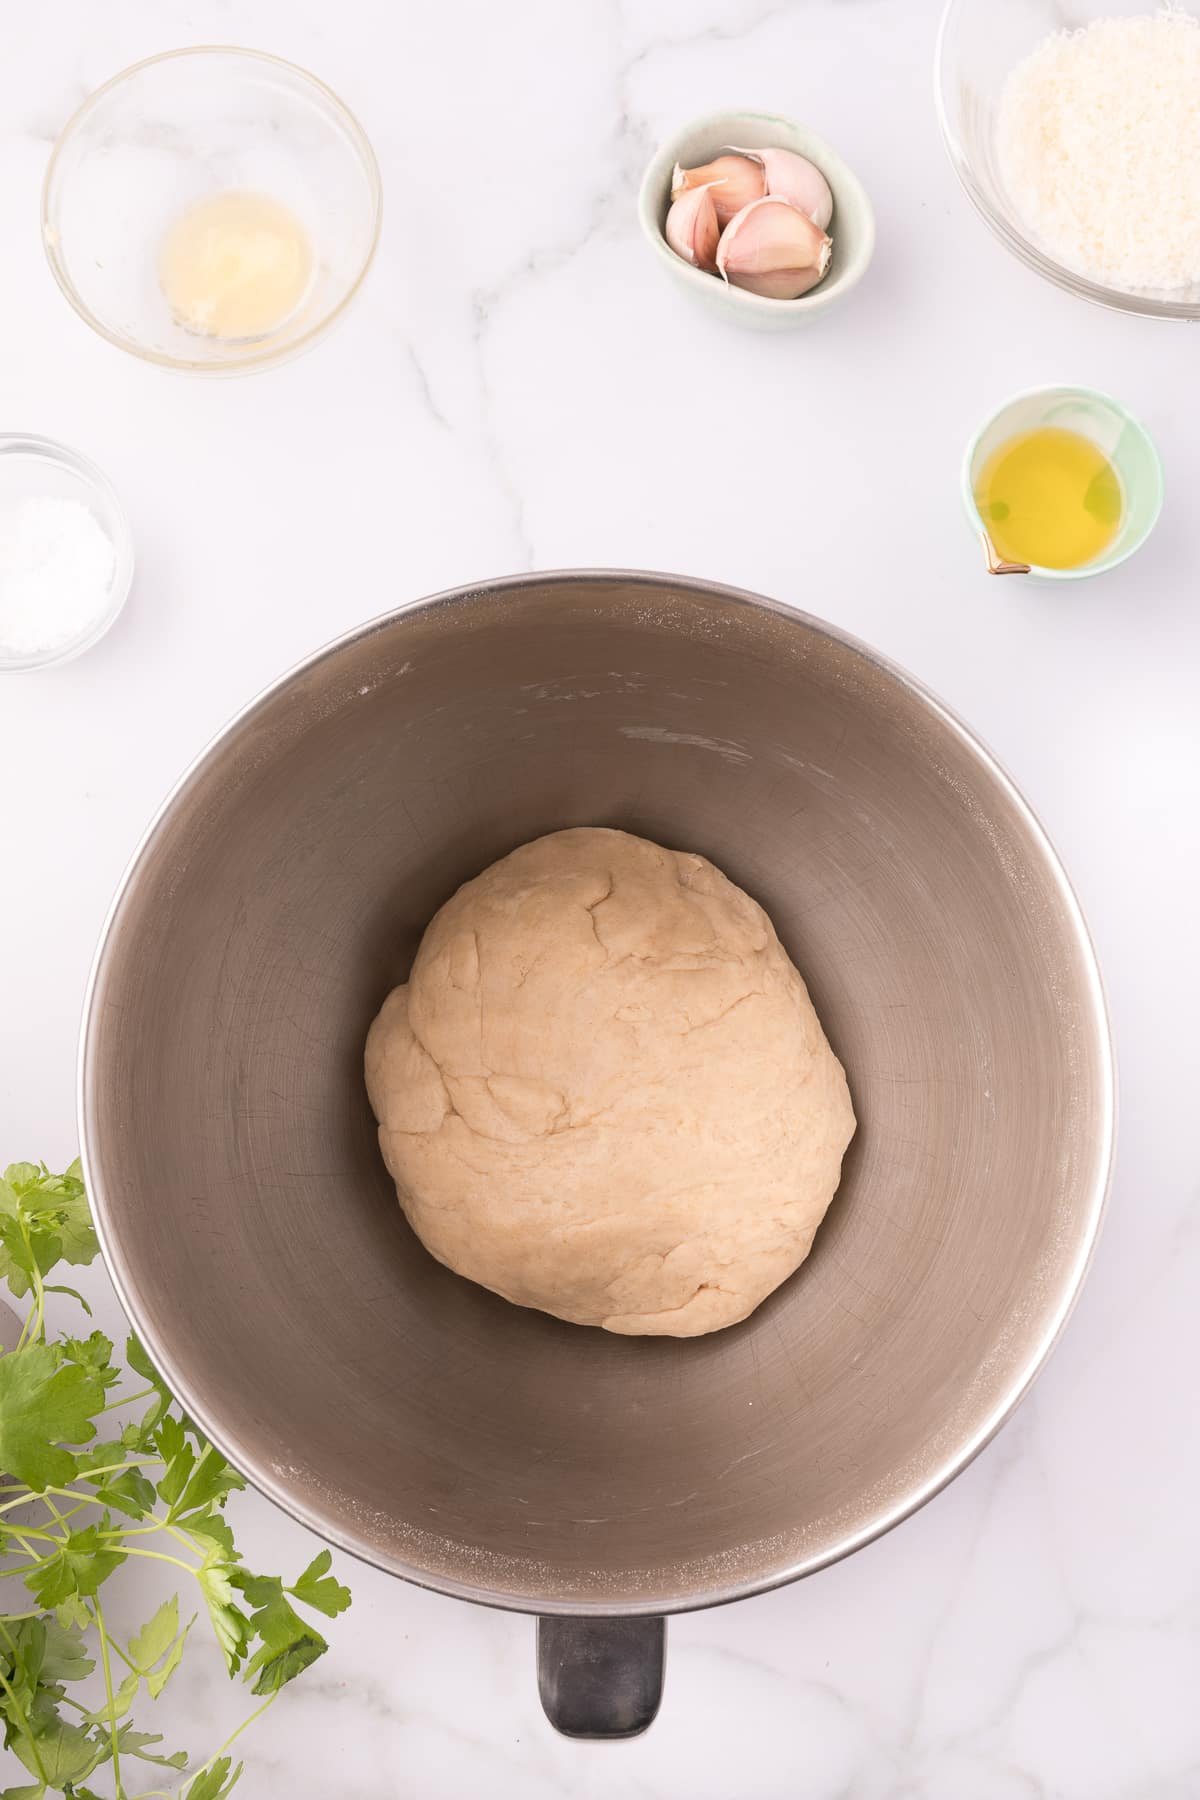 garlic knot dough ball in the metal bowl of a stand mixer